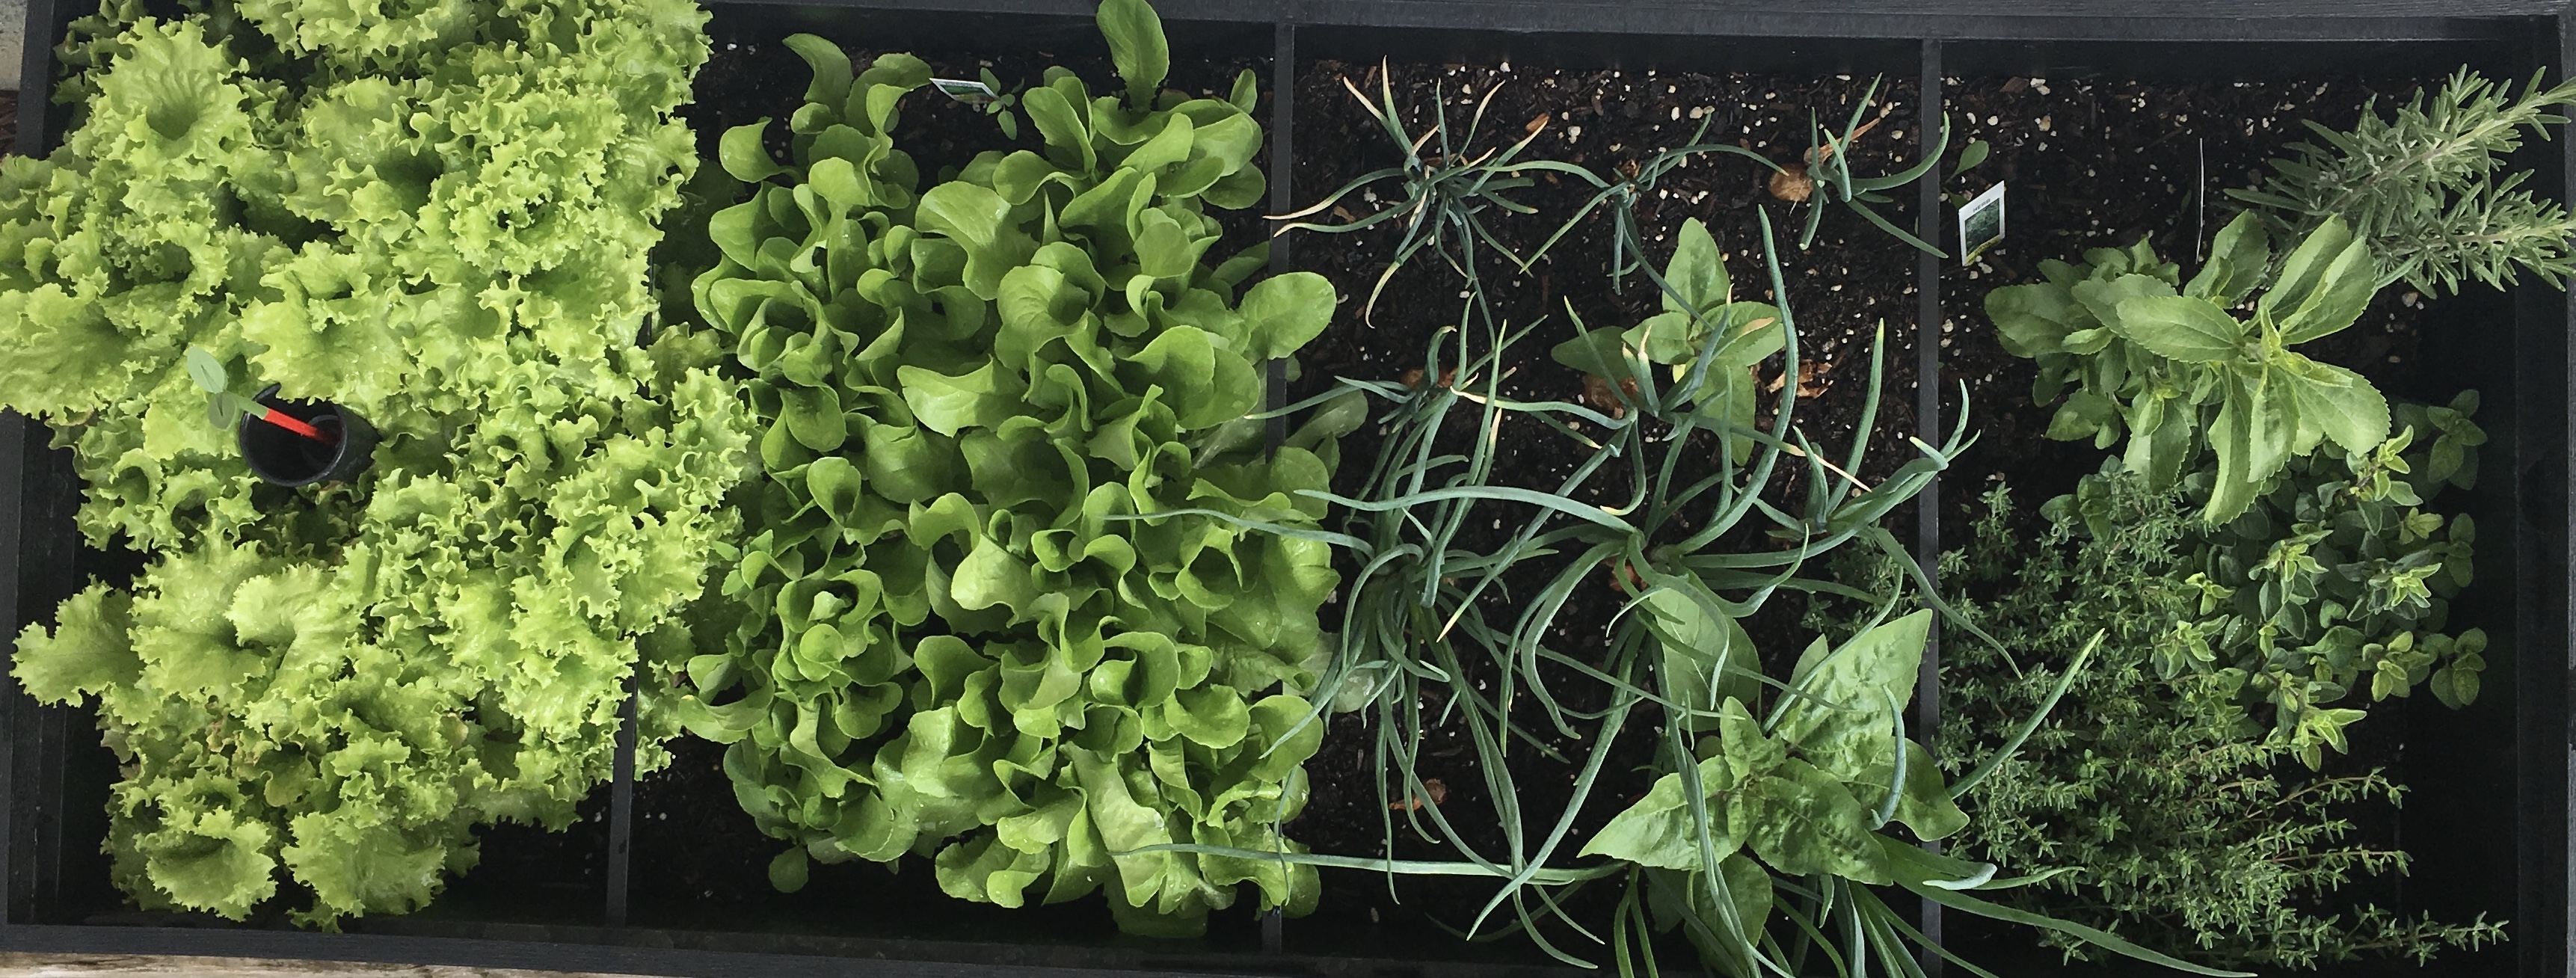 Grow for Flavor Lettuce, green onion, and herbs in a garden box